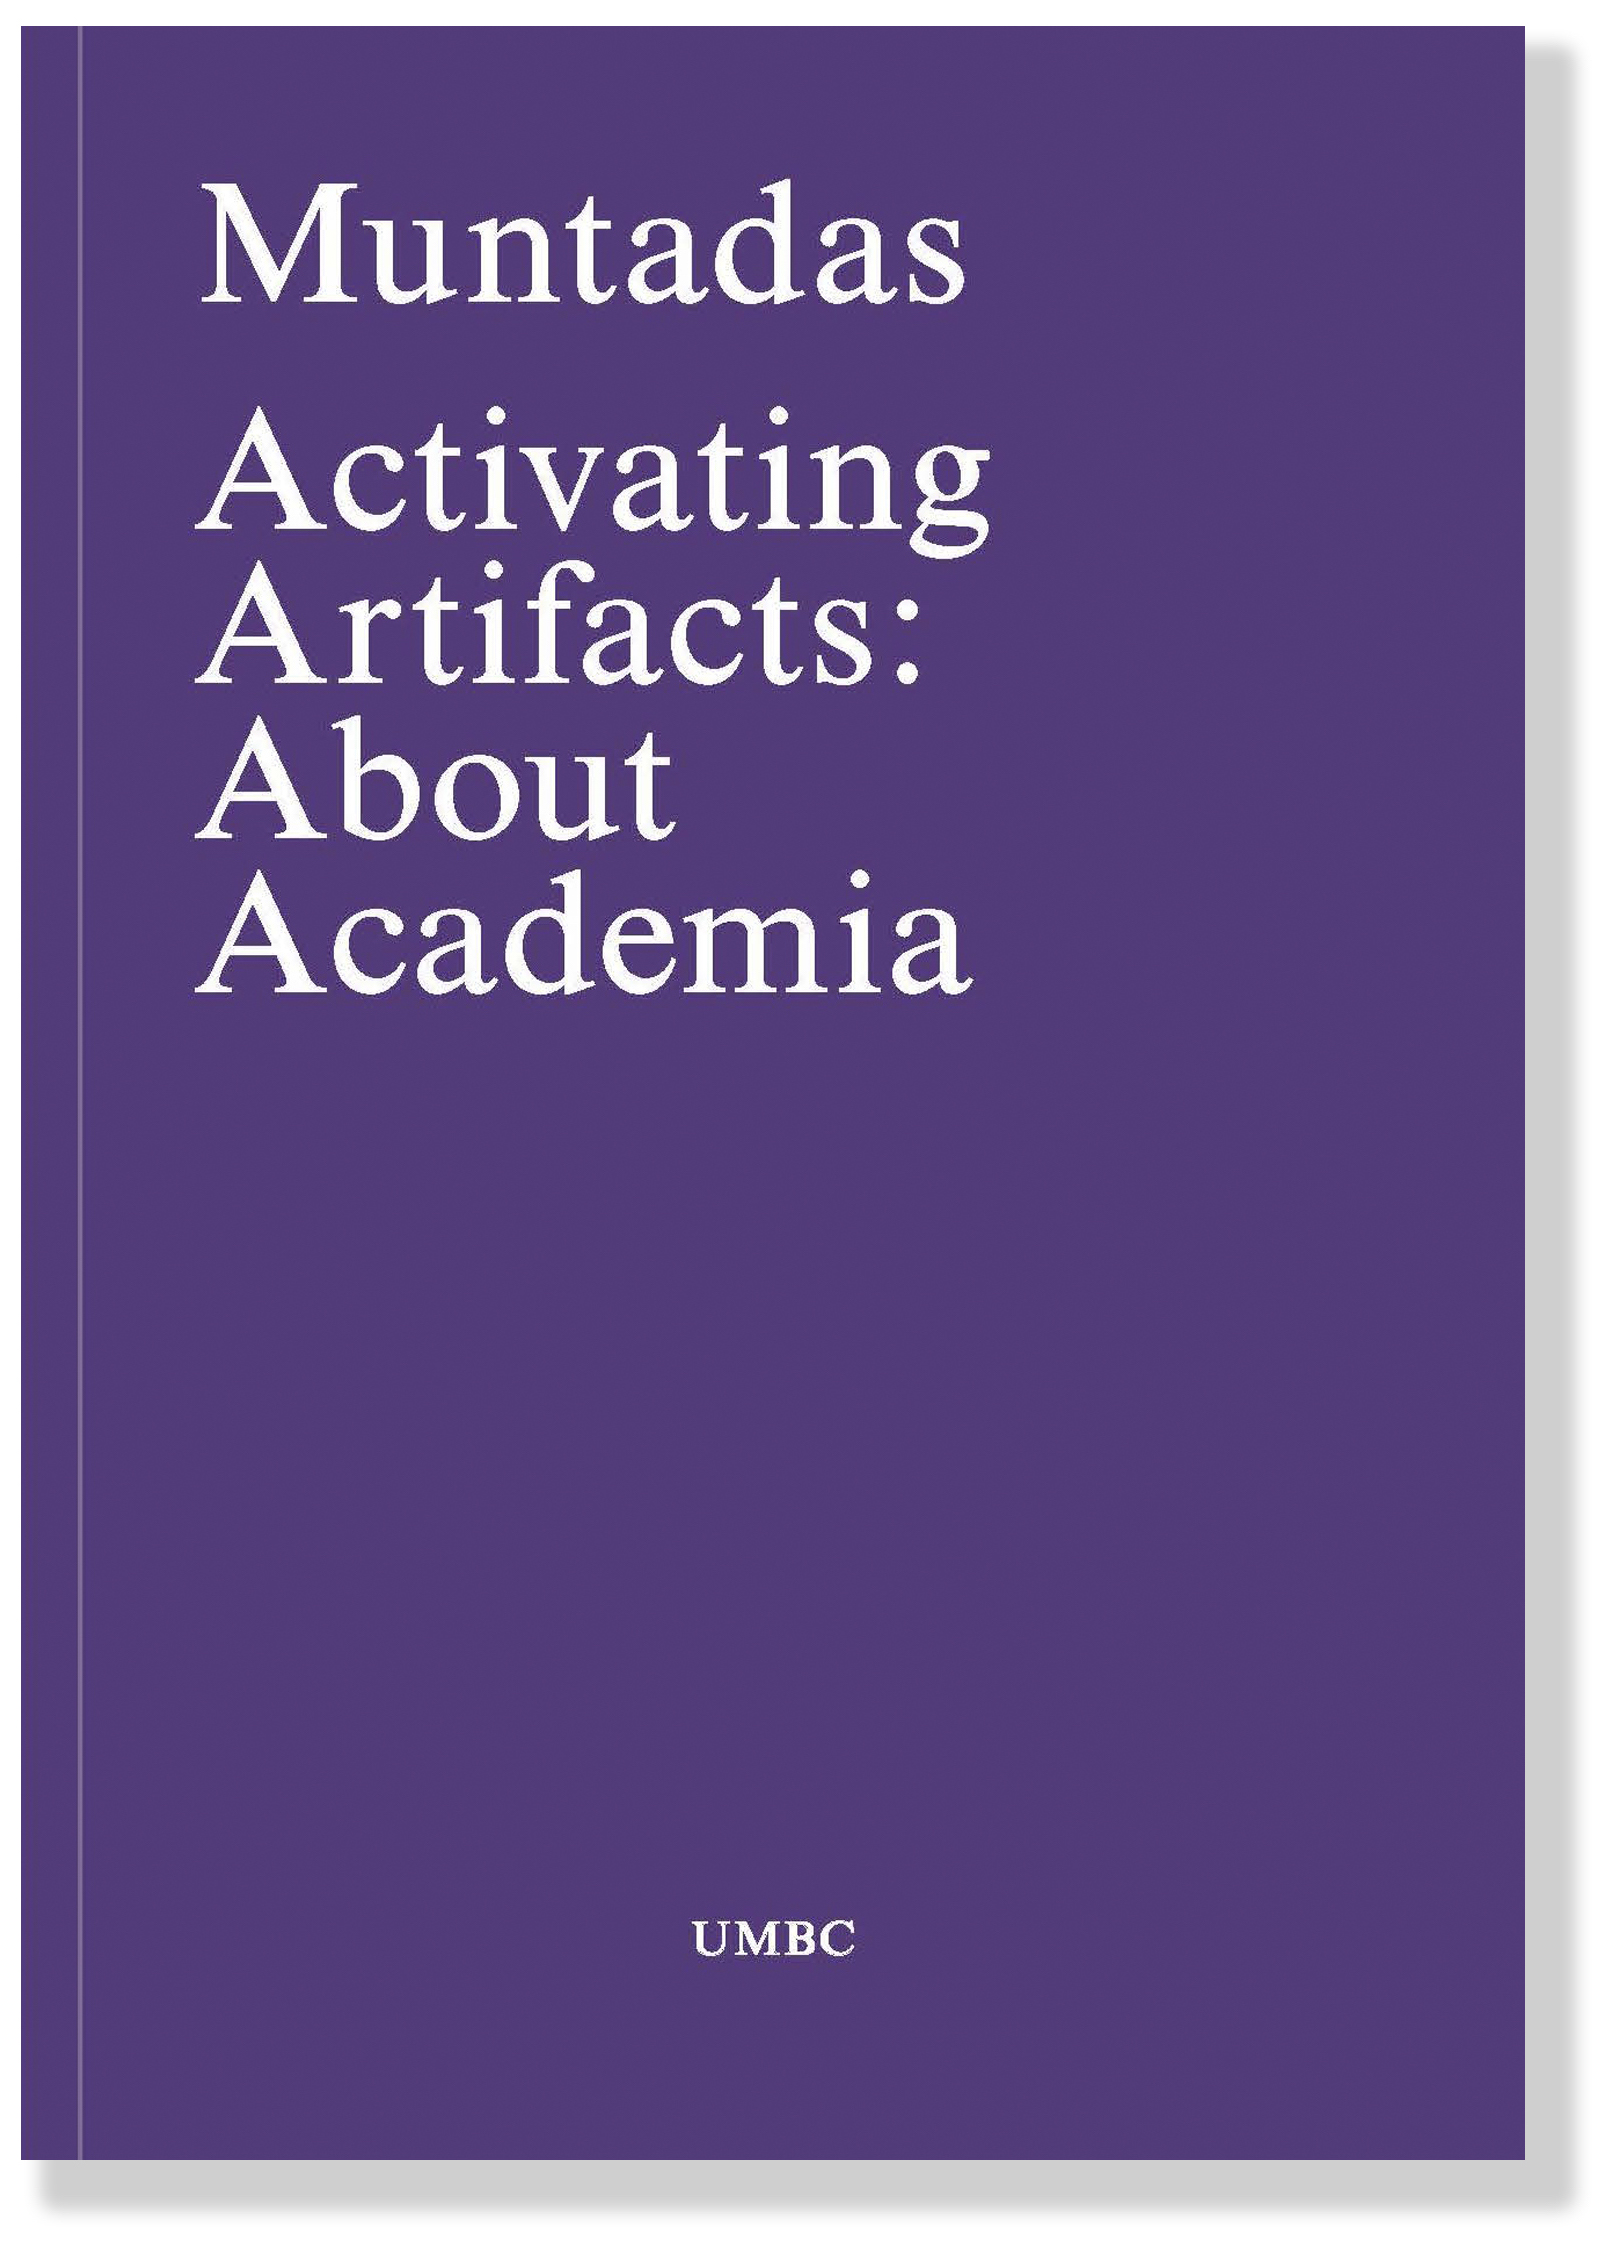 Over a solid dark purple cover, big white text reads "Muntadas." Just below reads "Activating Artifacts: About Academia." Each word takes up its own line, and the text comprises the top half of the cover. At the bottom of the cover, in much smaller text, reads "UMBC."